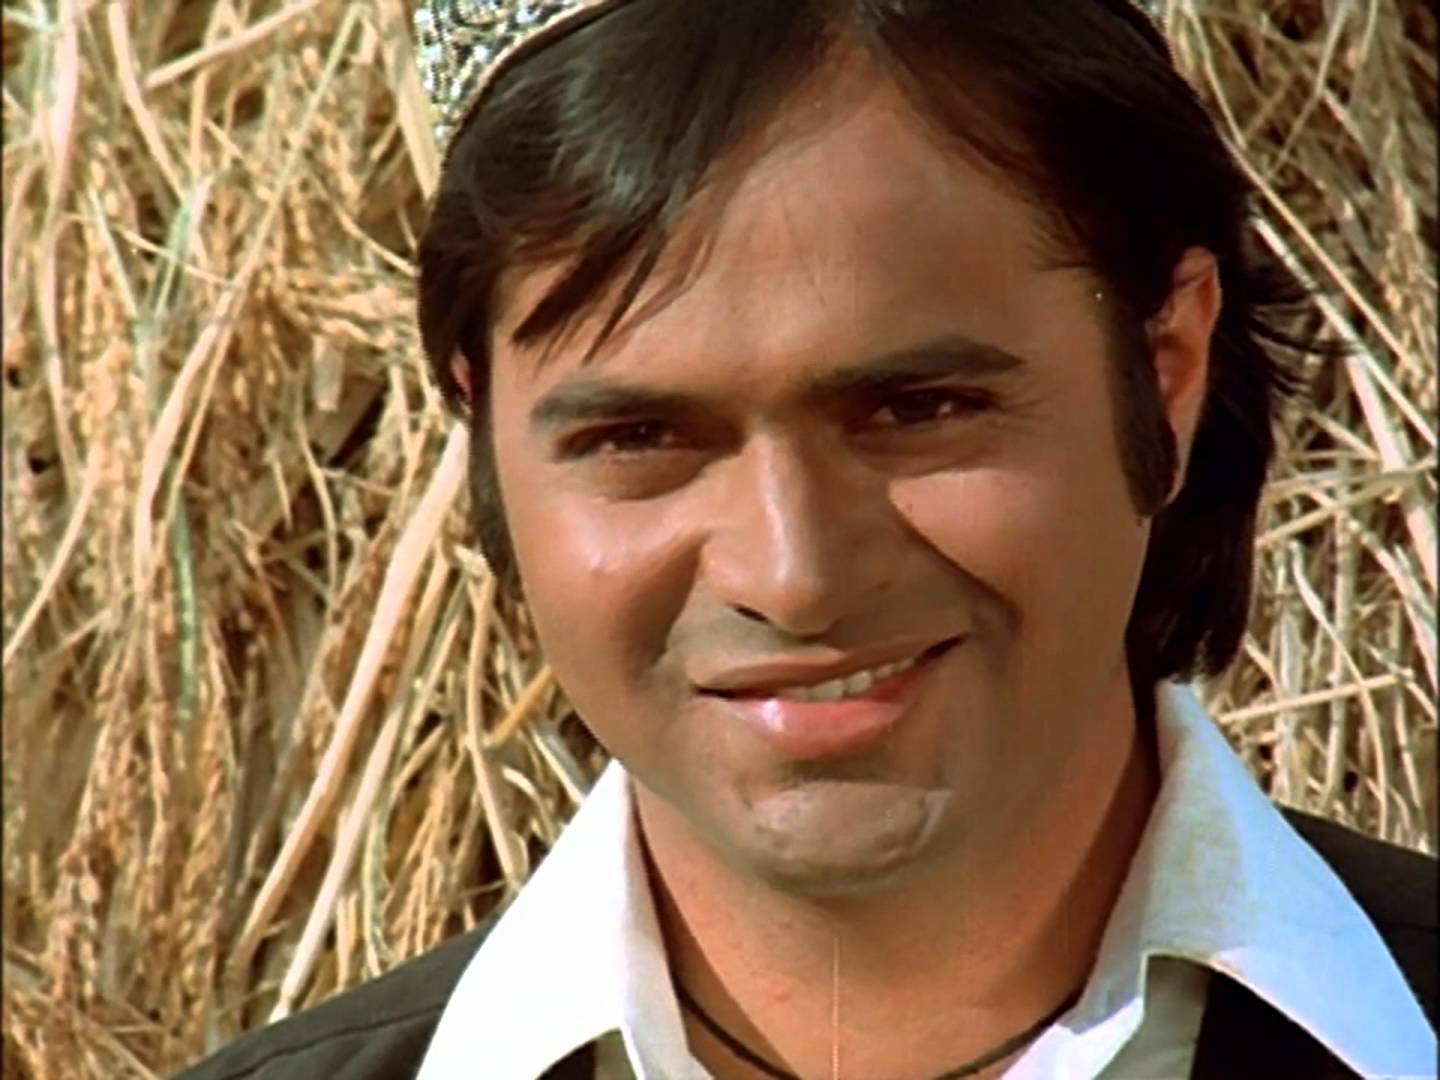 Indian actor, one of the famous faces of Bollywood: Who is Farooq Shaikh?